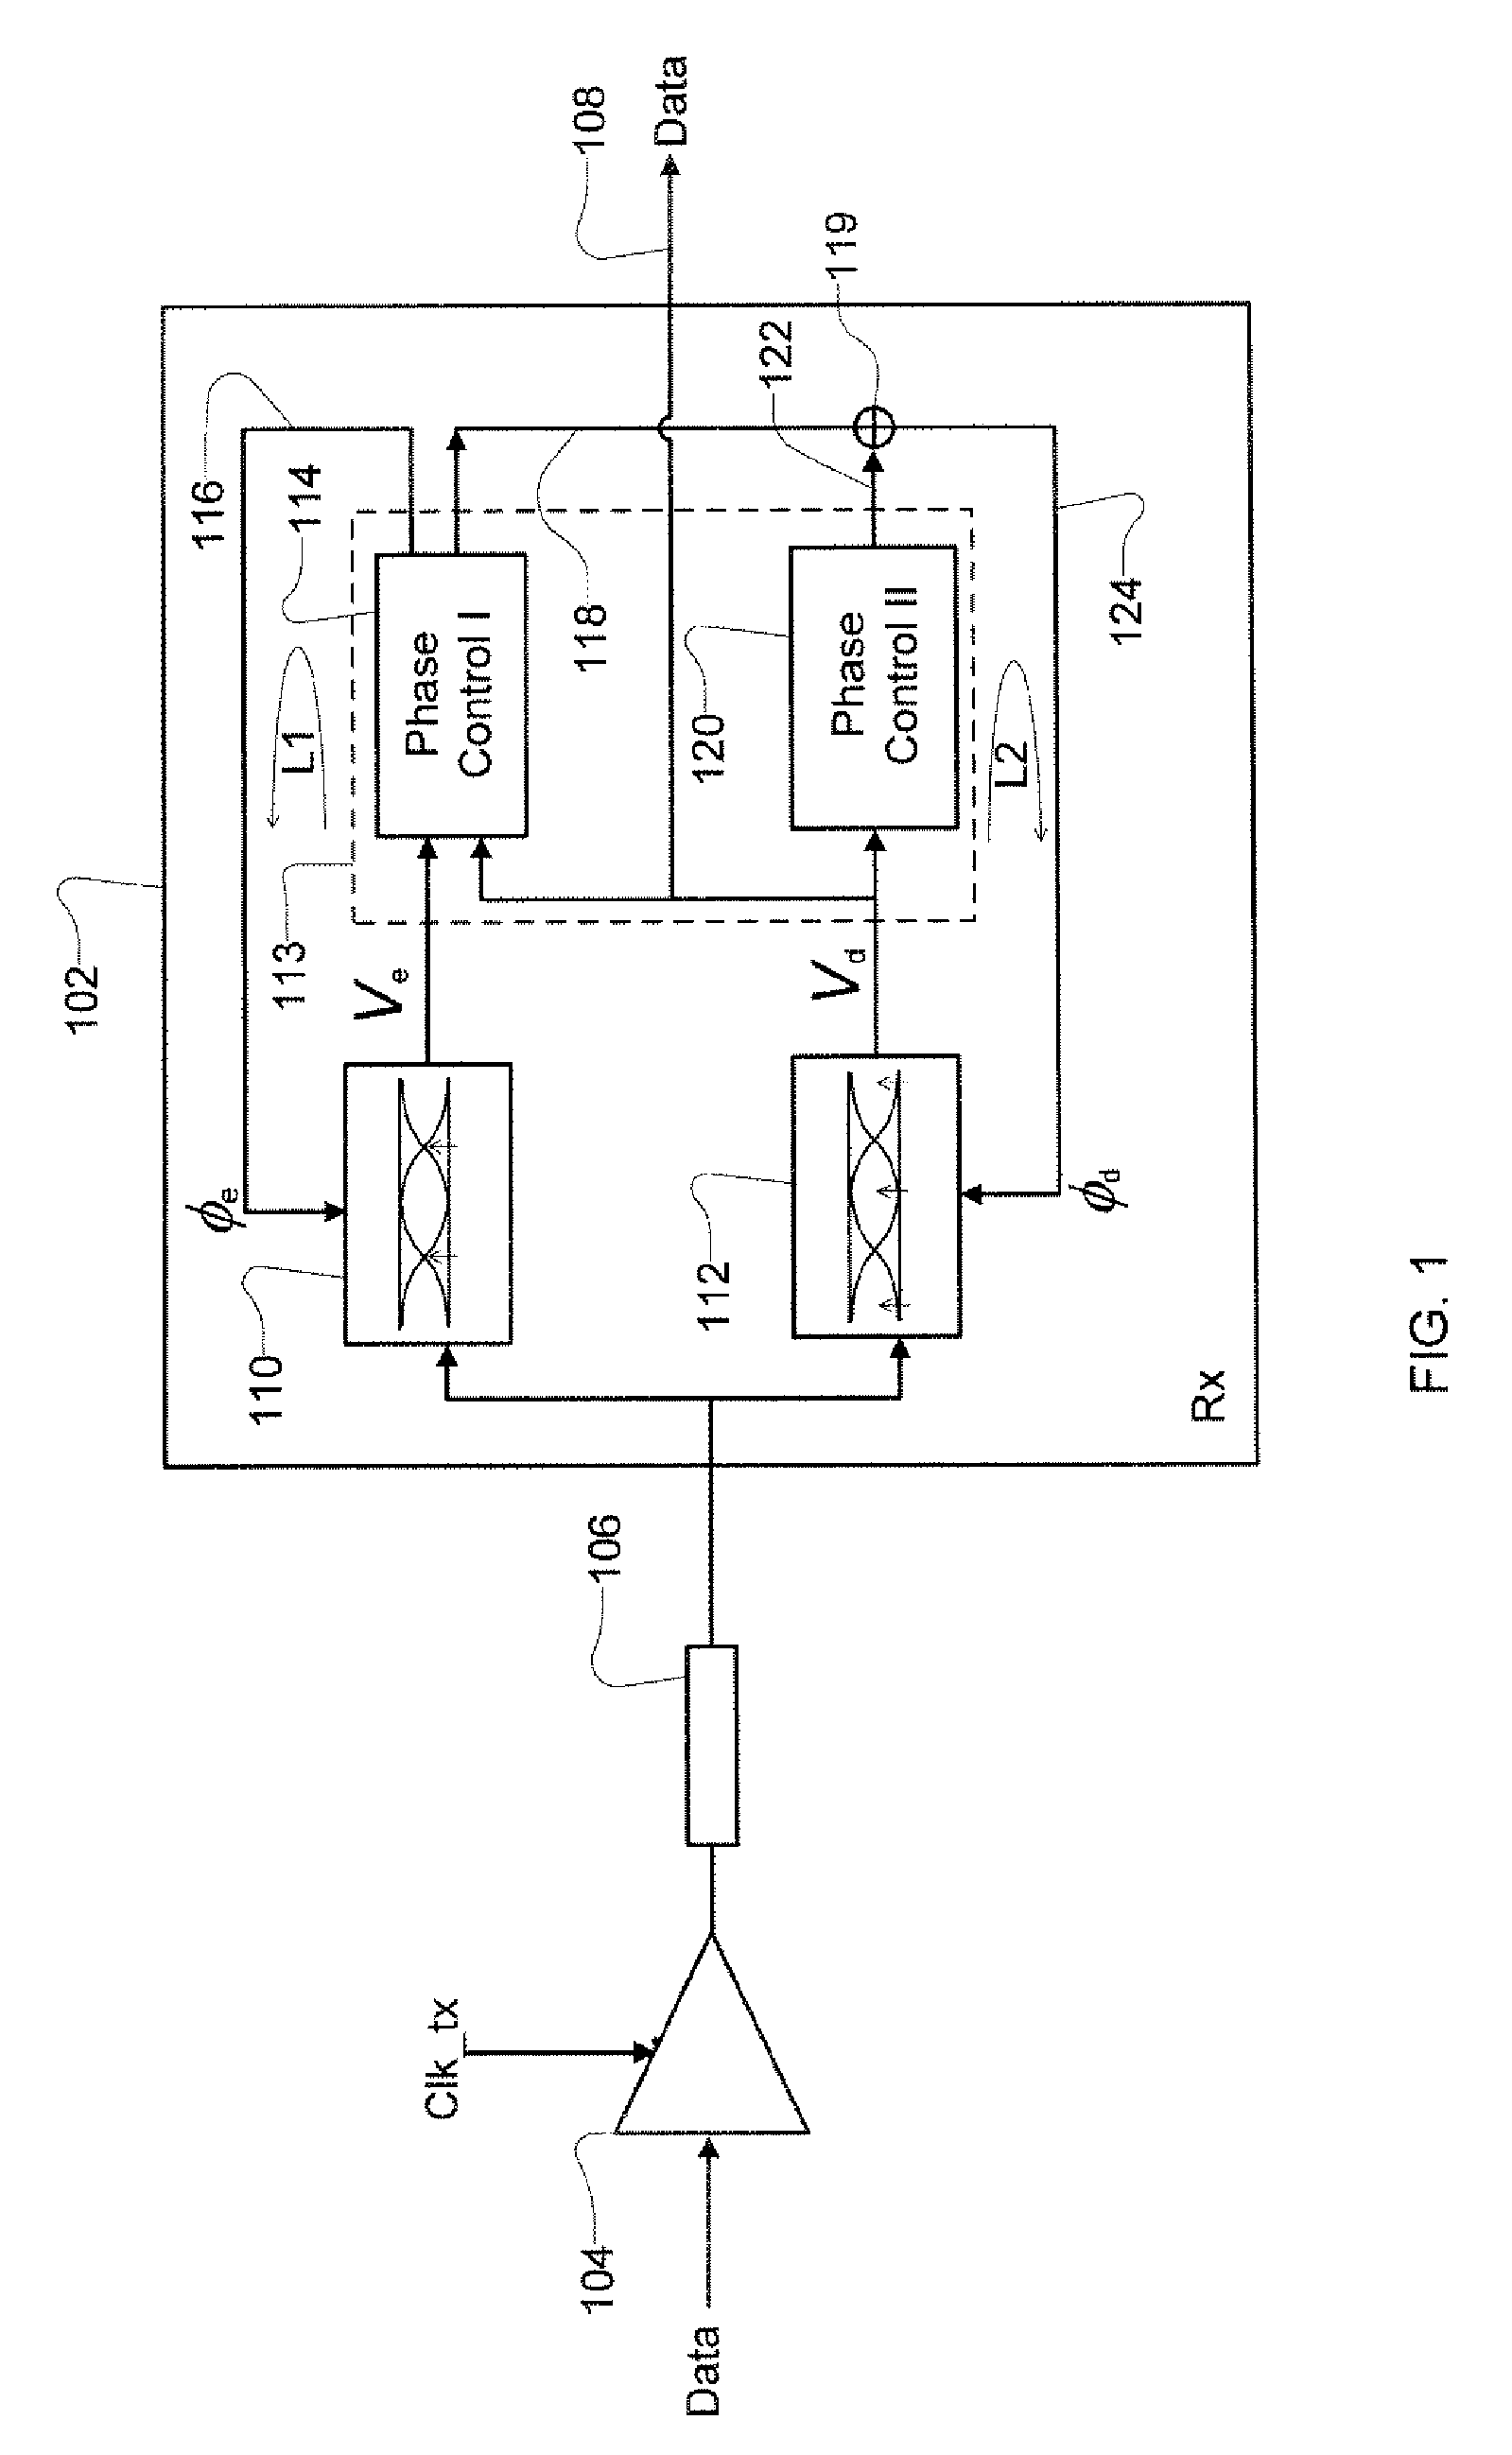 Receiver with enhanced clock and data recovery